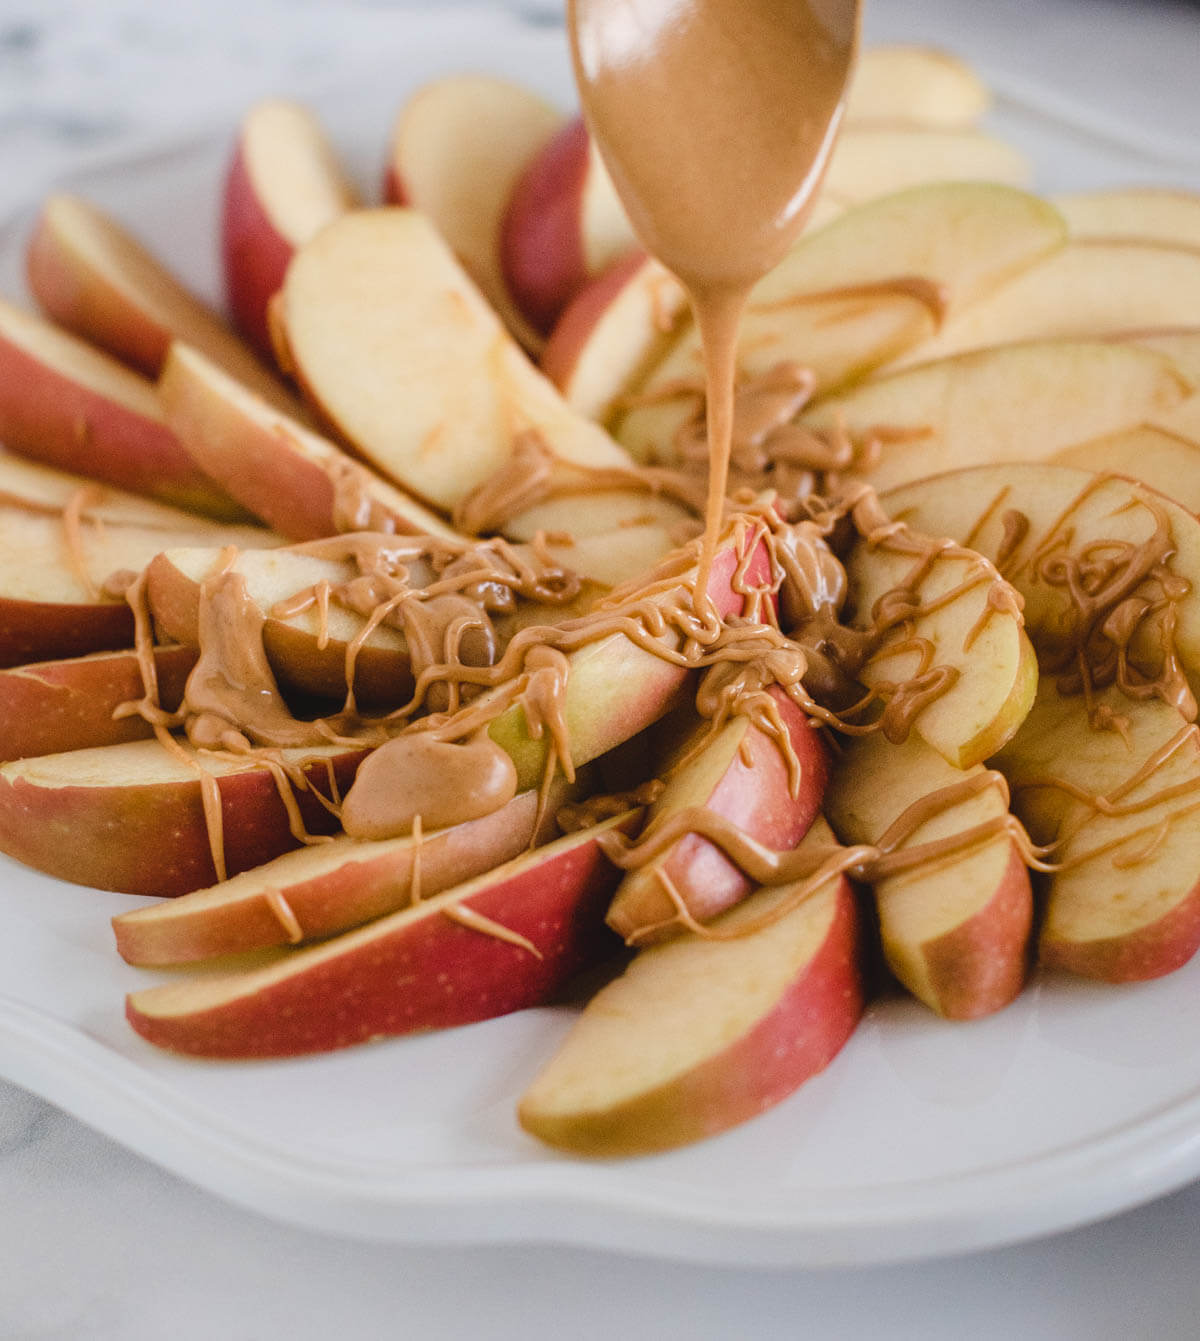 Sliced apples on a plate with peanut butter sauce drizzled on top.